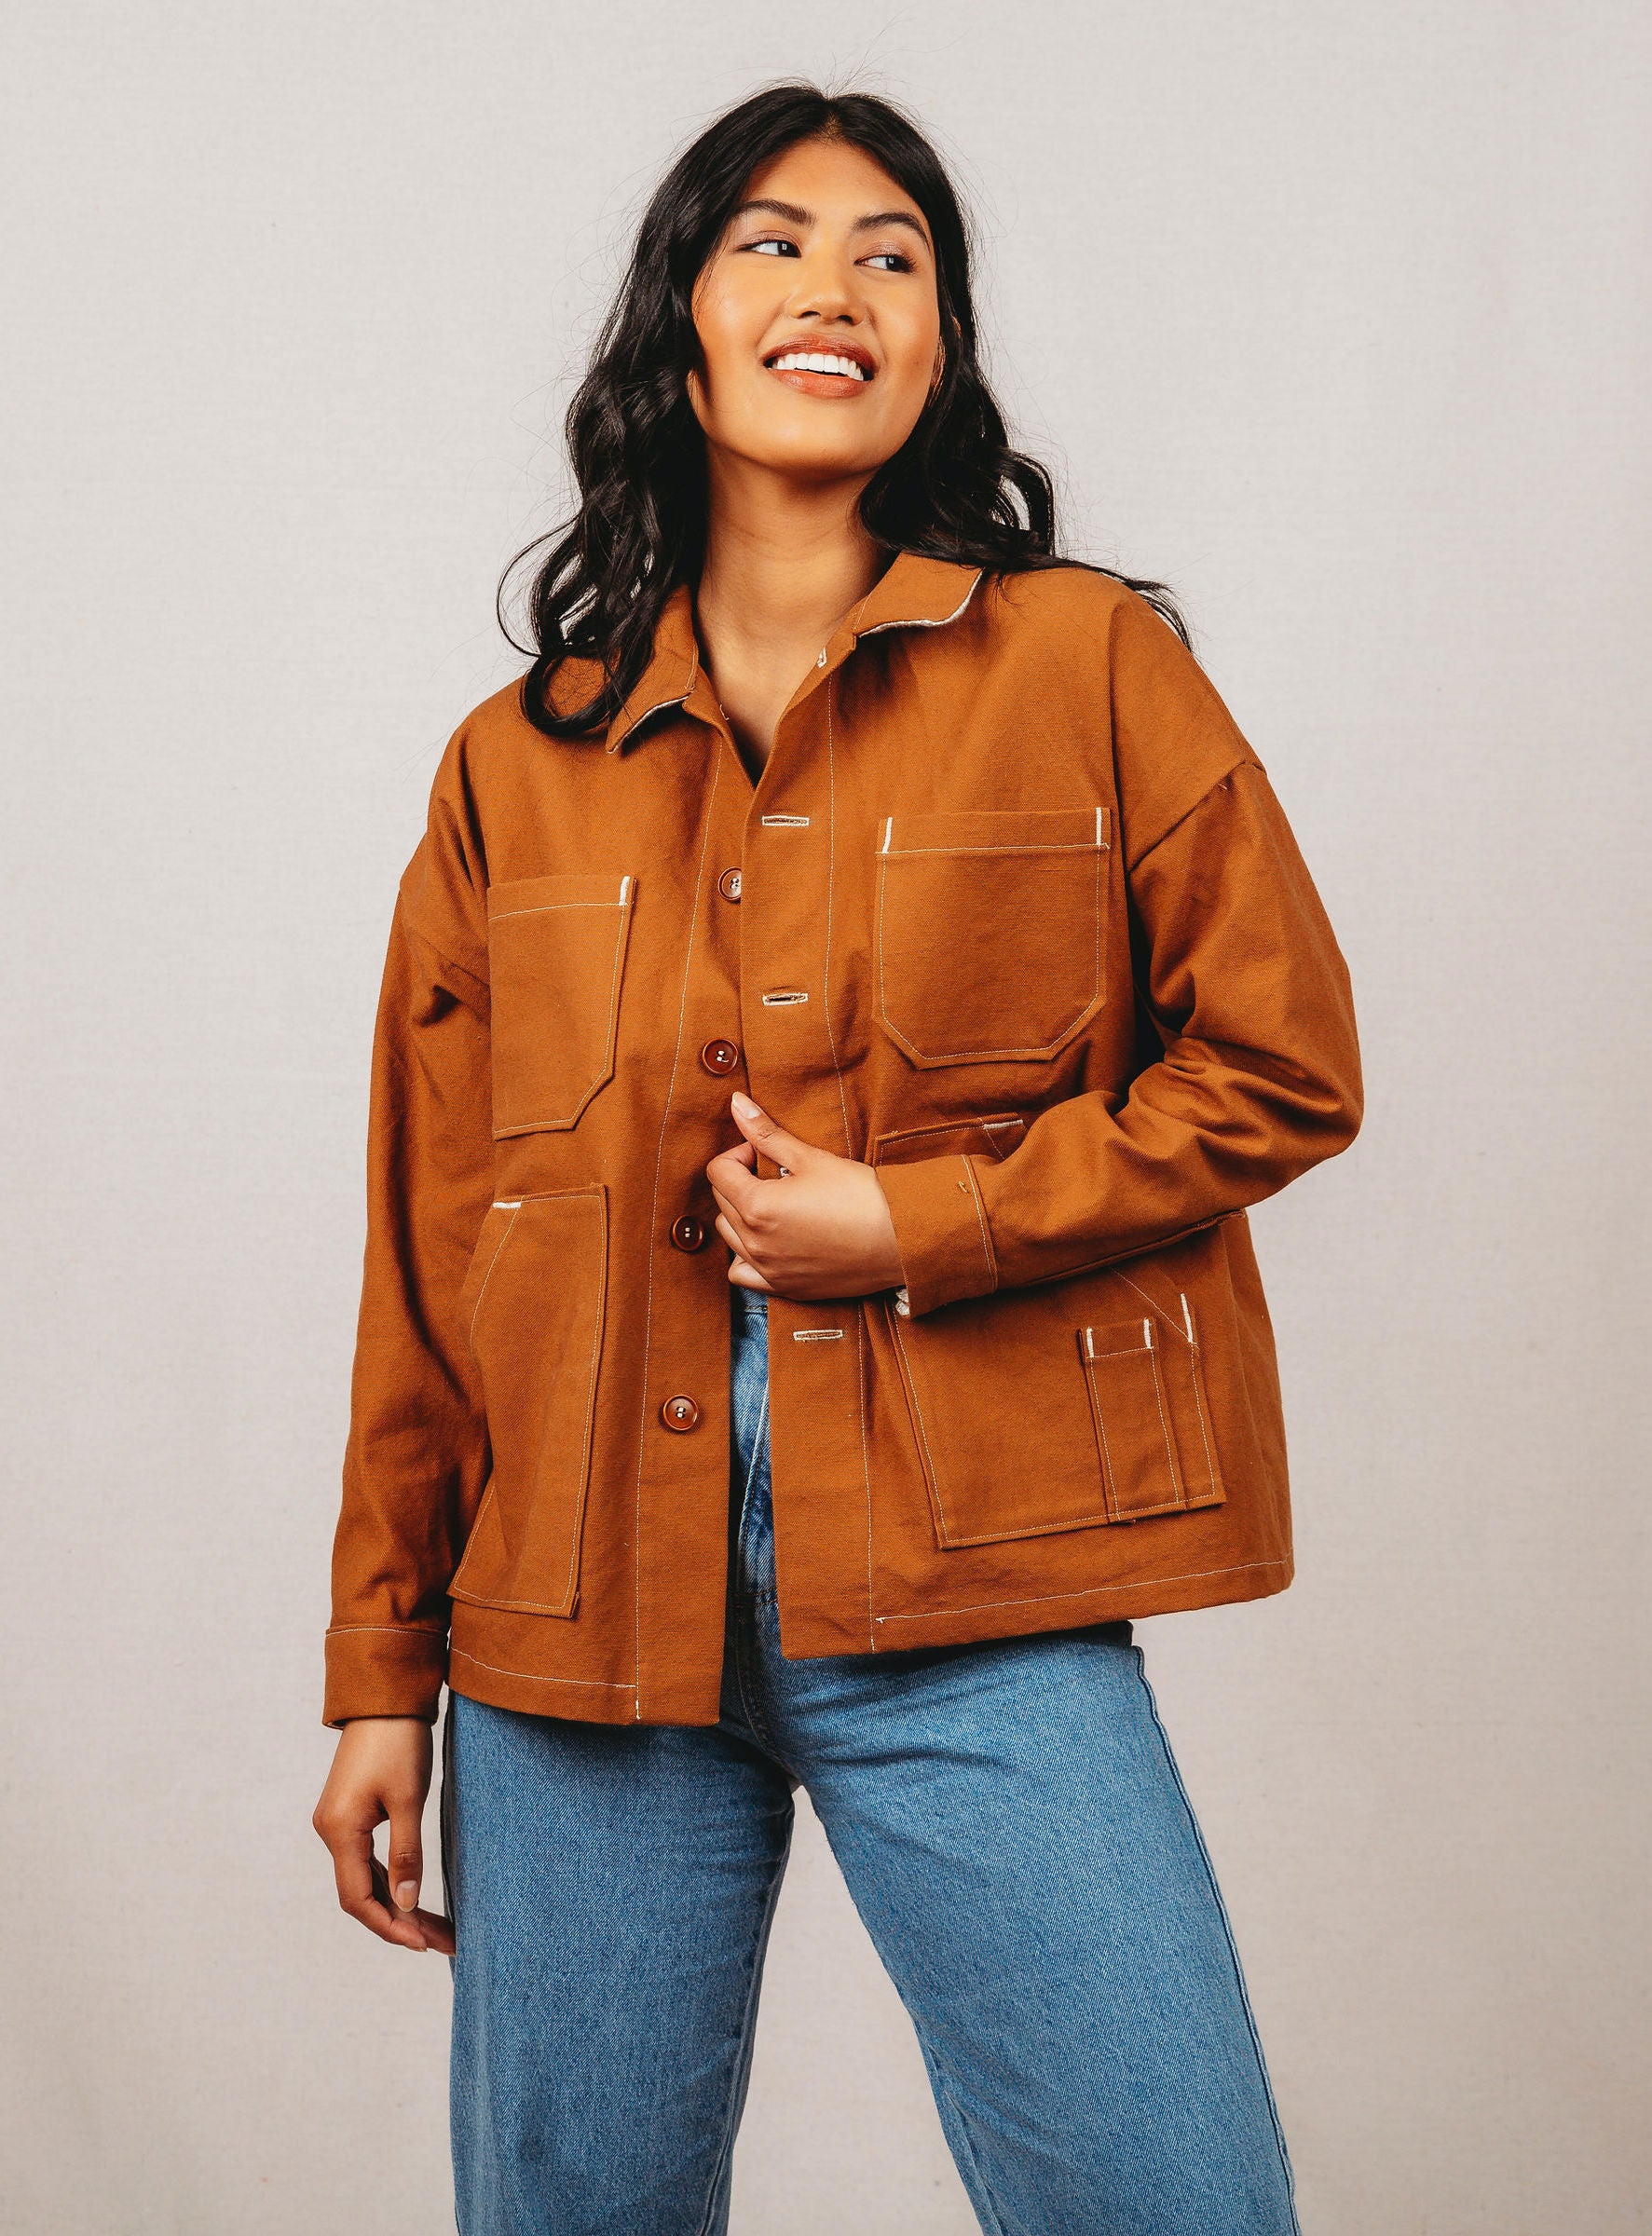 The Audrey Jacket Sewing Pattern, by Seamwork